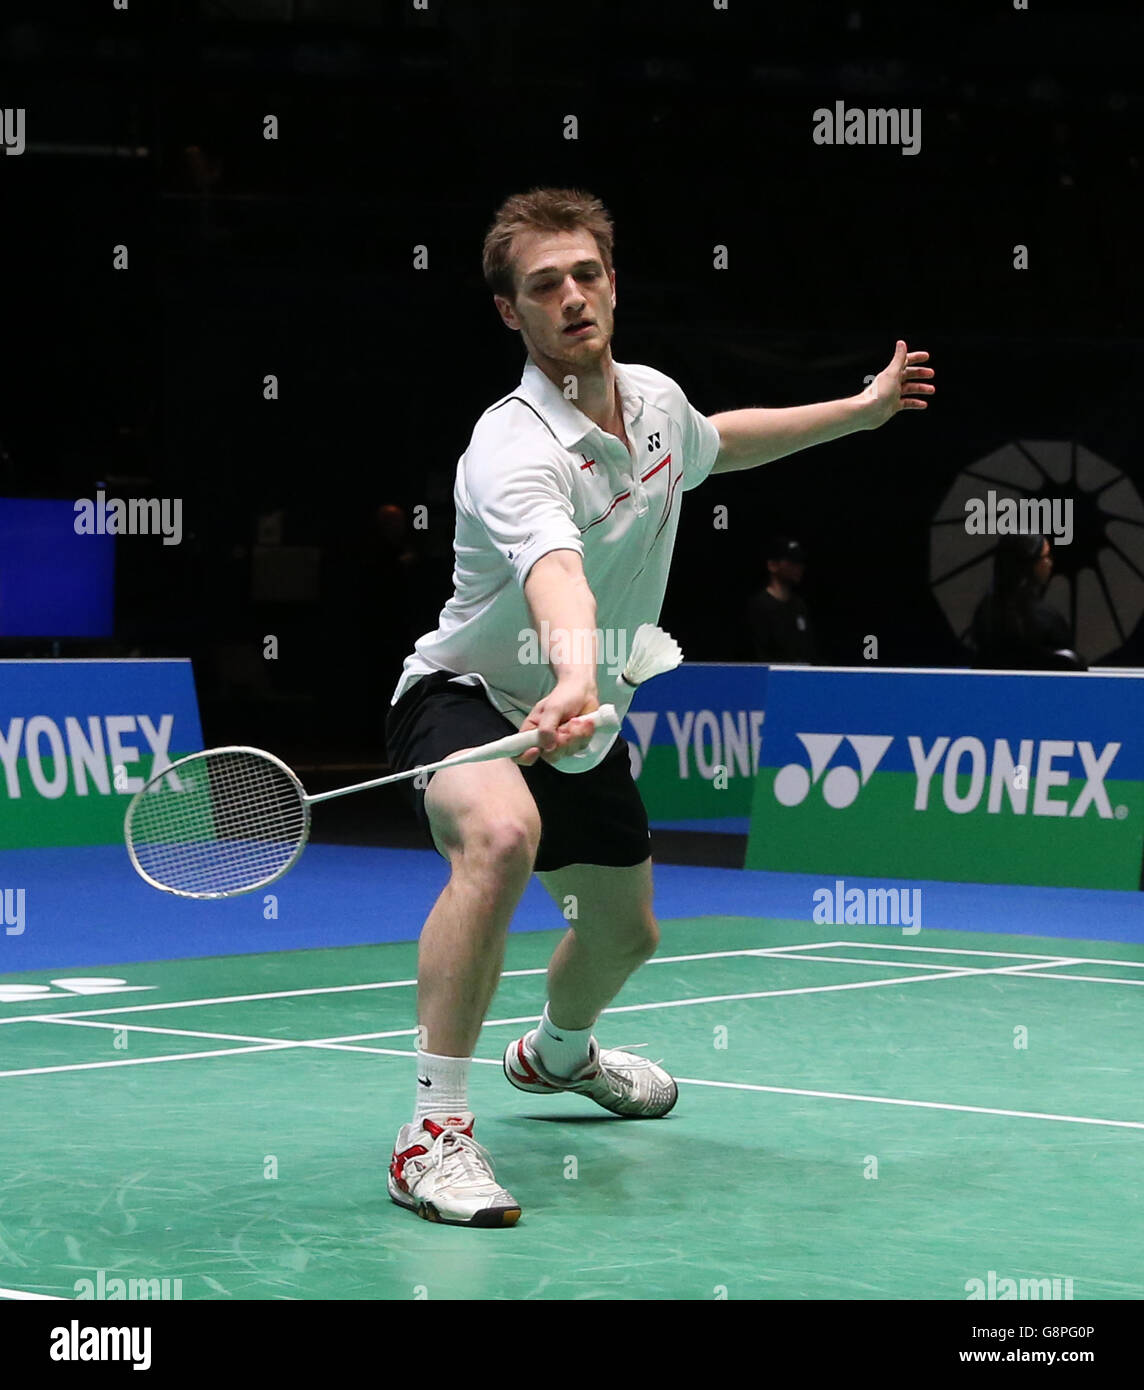 England's Harley Towler in action during his double's match during day one of the YONEX All England Open Badminton Championships at the Barclaycard Arena, Birmingham. Stock Photo